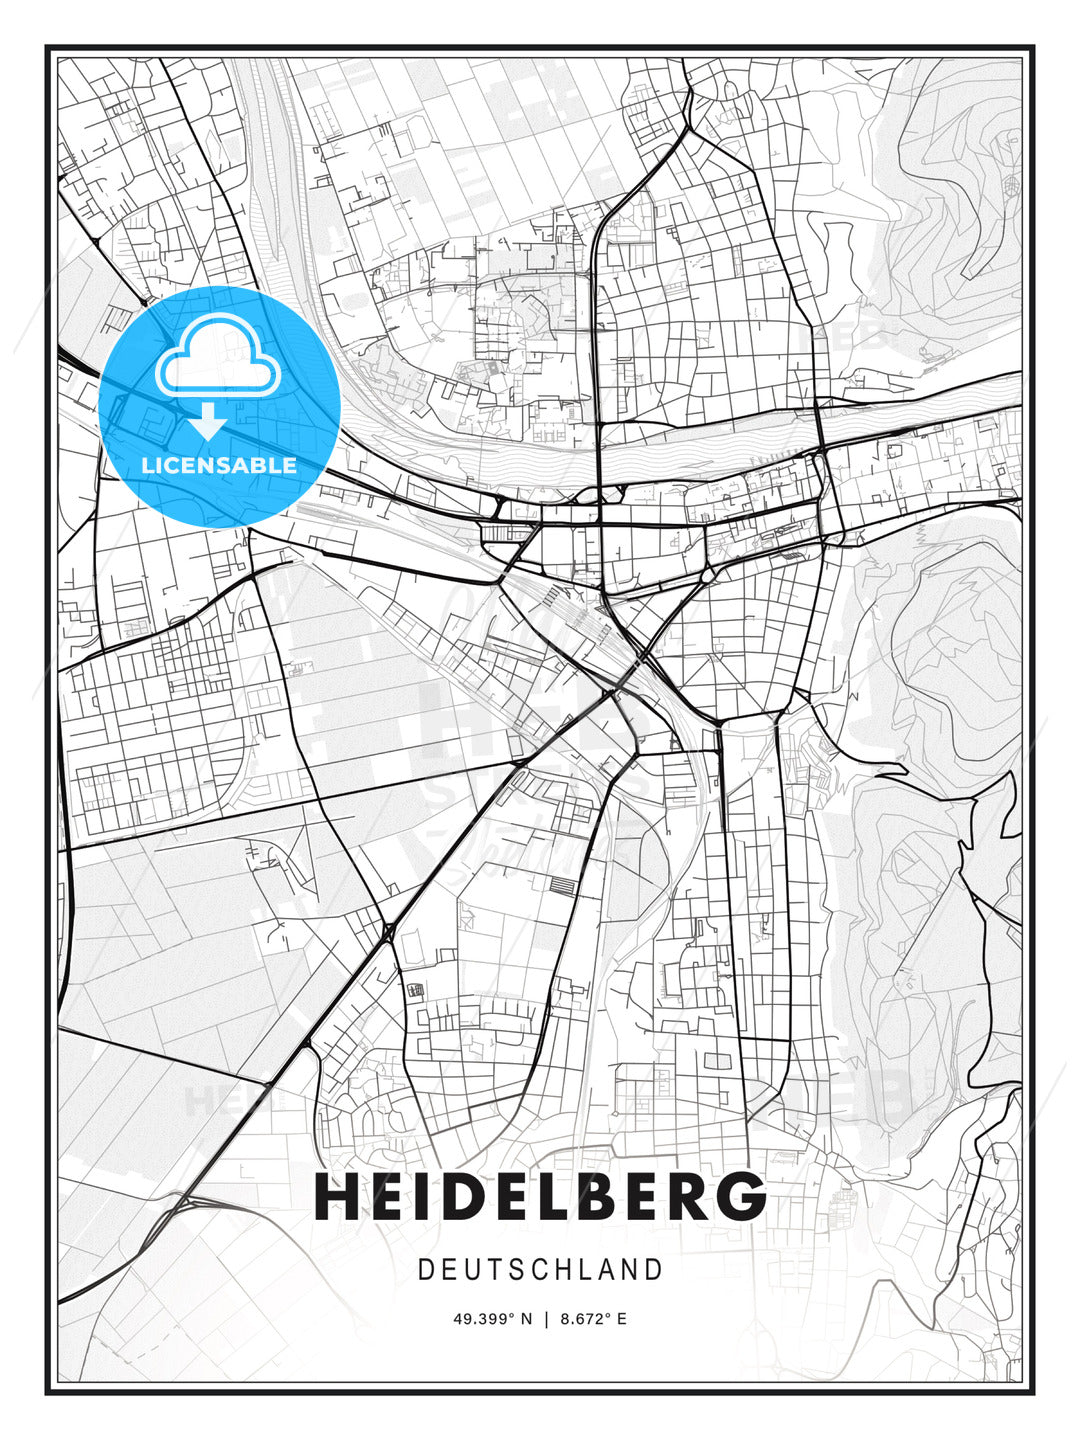 Heidelberg, Germany, Modern Print Template in Various Formats - HEBSTREITS Sketches